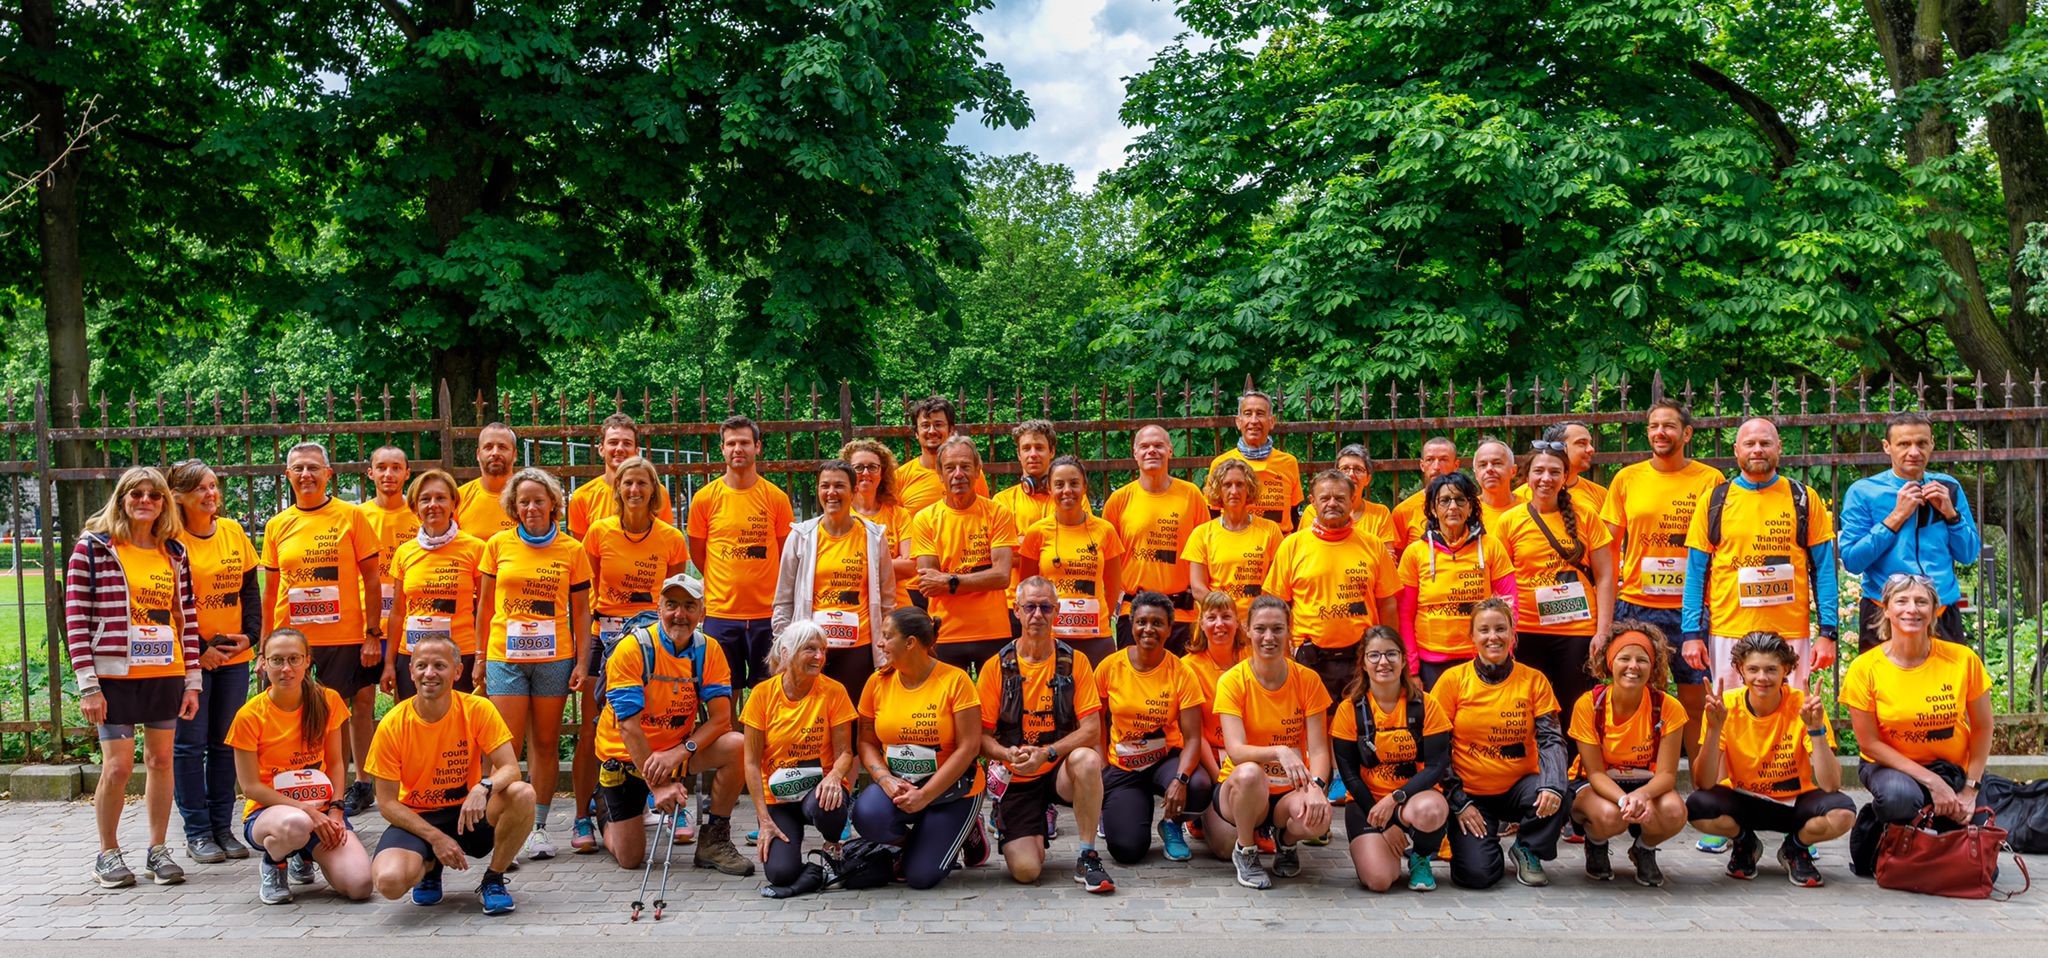 Act-unity ran for Triangle Wallonie @ 20 kilometers of Brussels